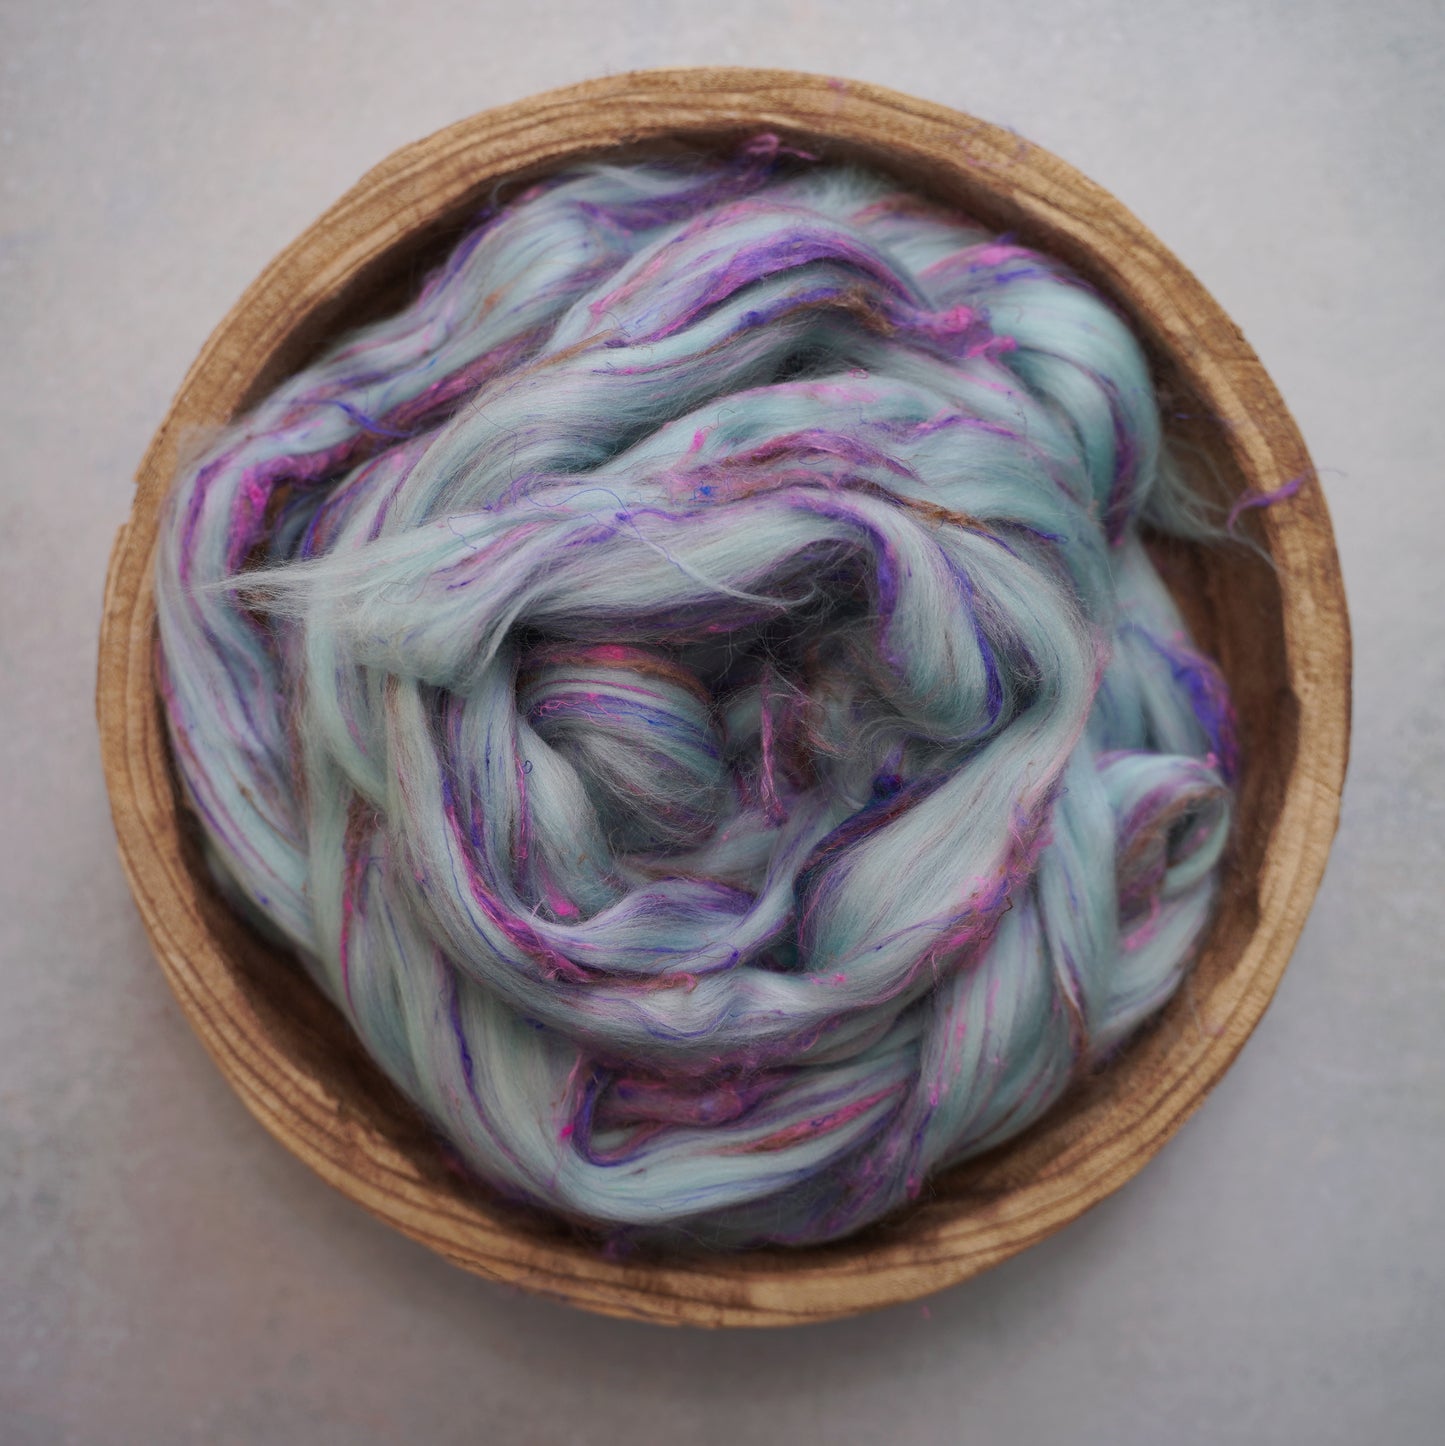 How to Blend Wool Roving for Felting 